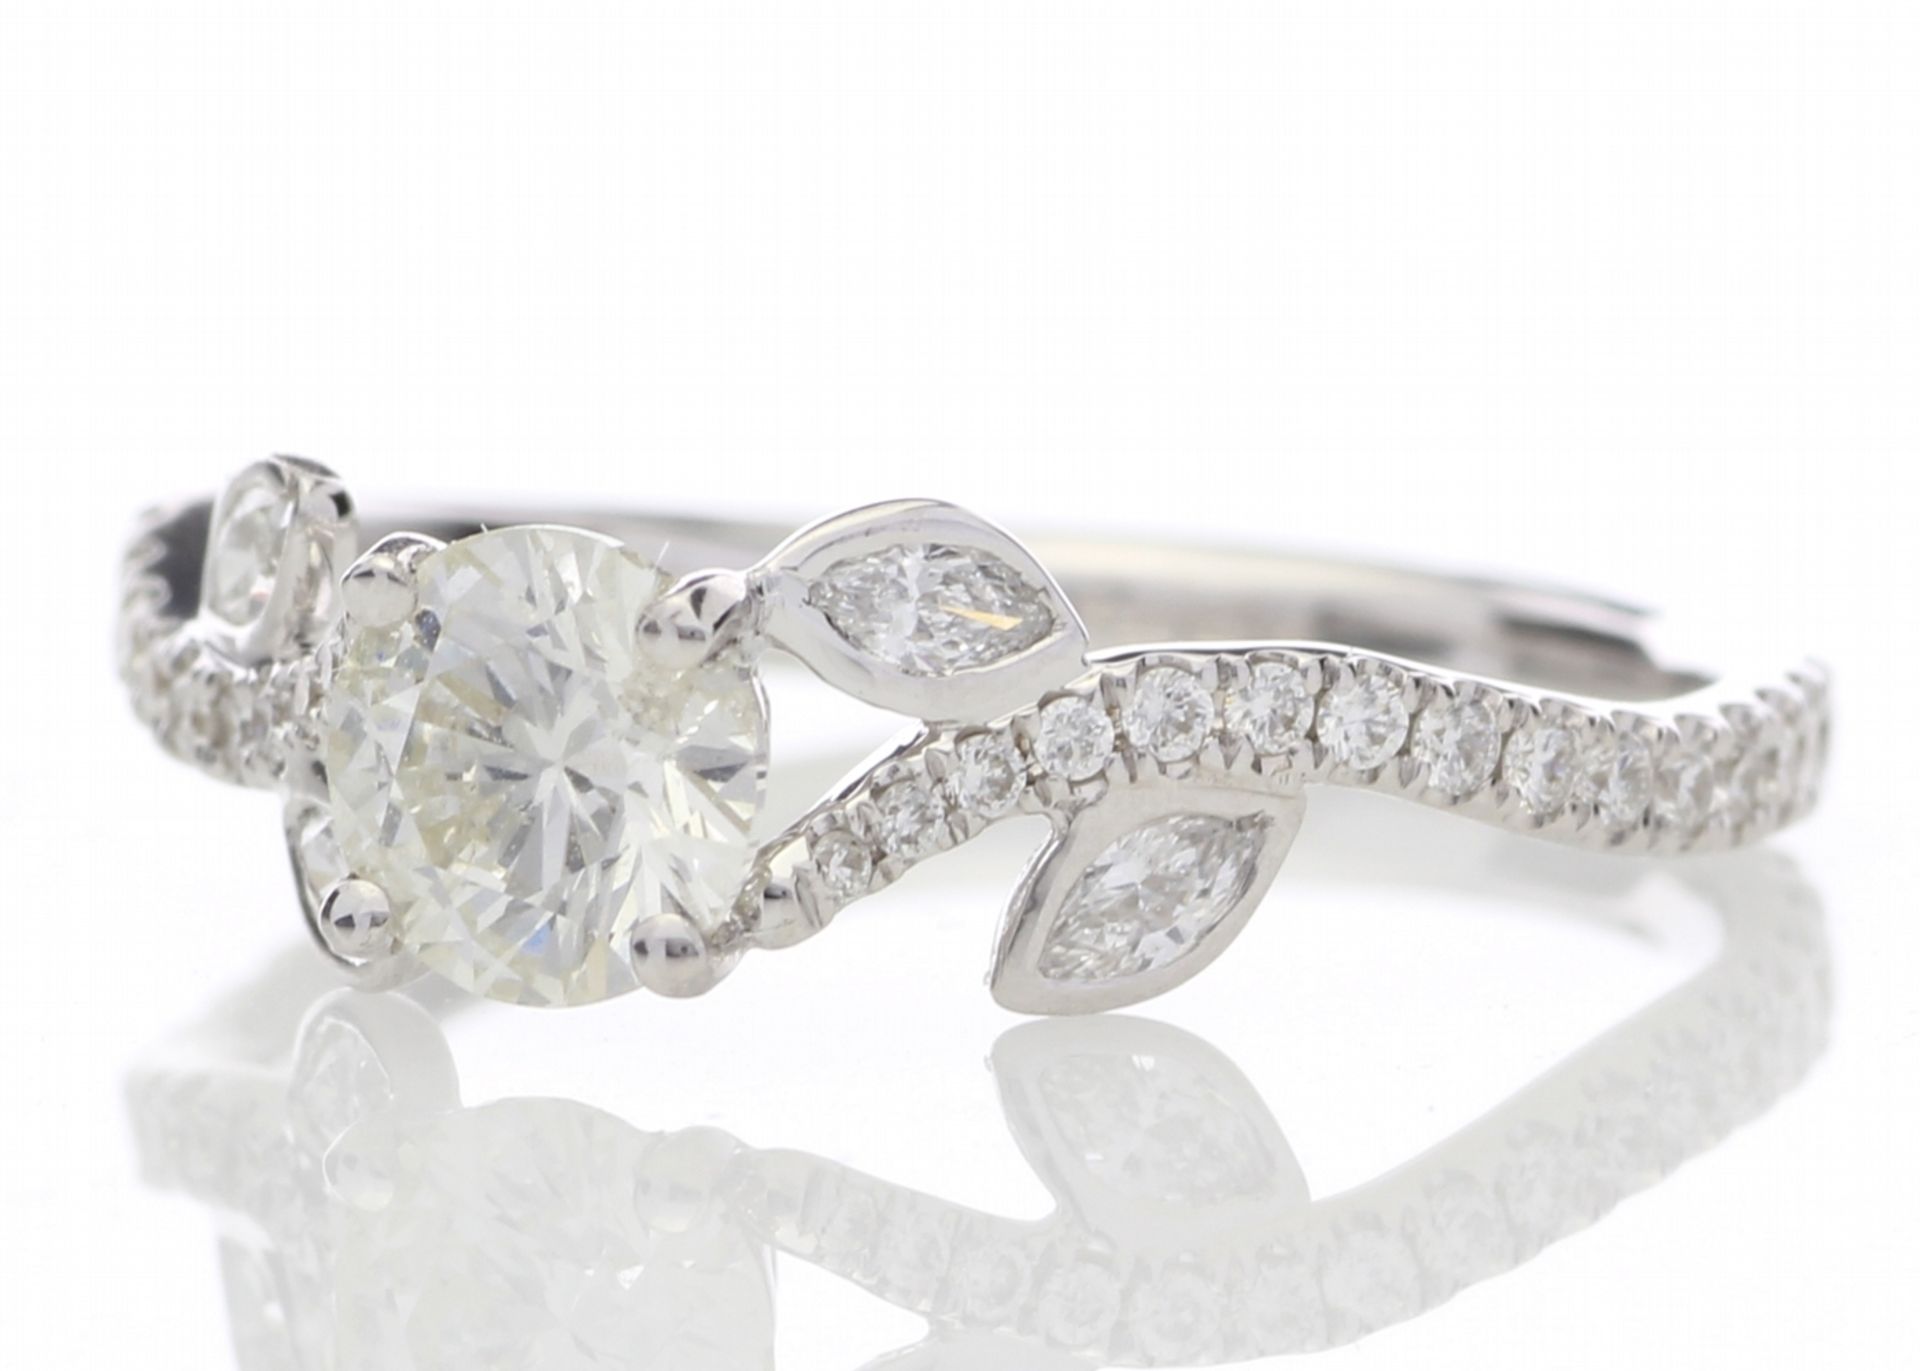 18ct White Gold Single Stone Diamond Ring With Stone Set Shoulders (0.55) 0.91 Carats - Image 2 of 5